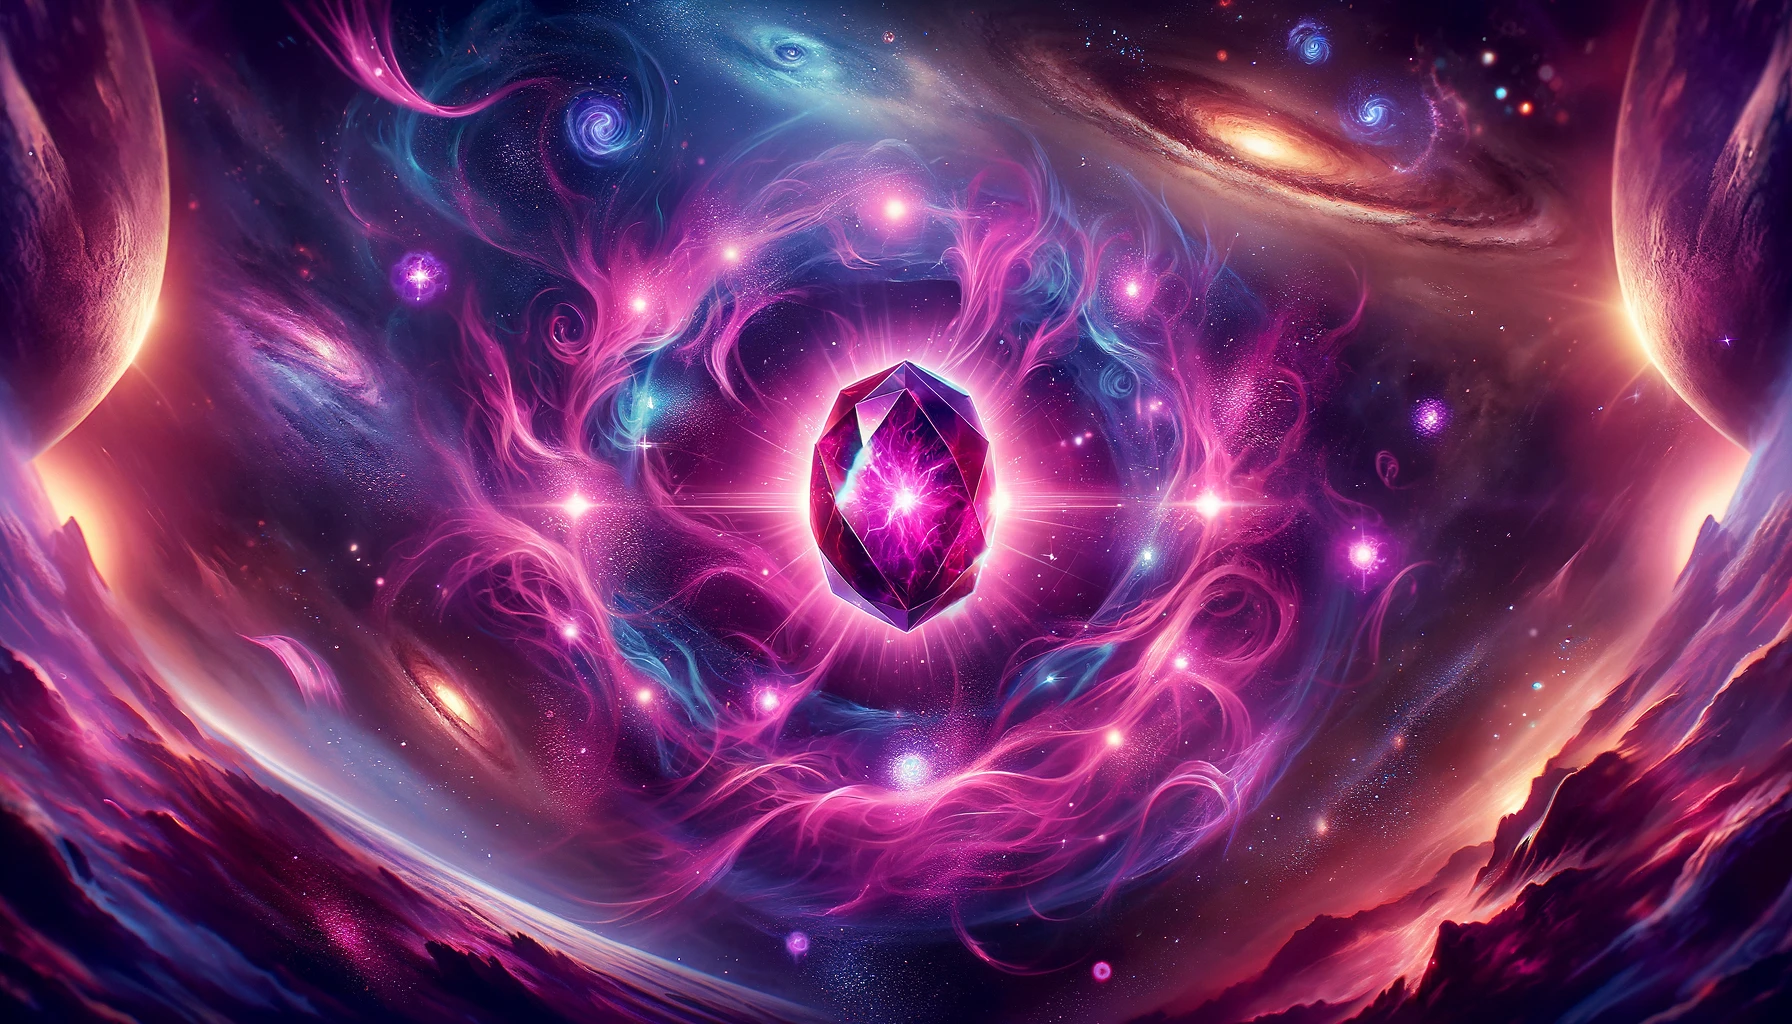 The Power Stone from Marvel Snap, radiating with energy in the heart of a swirling nebula